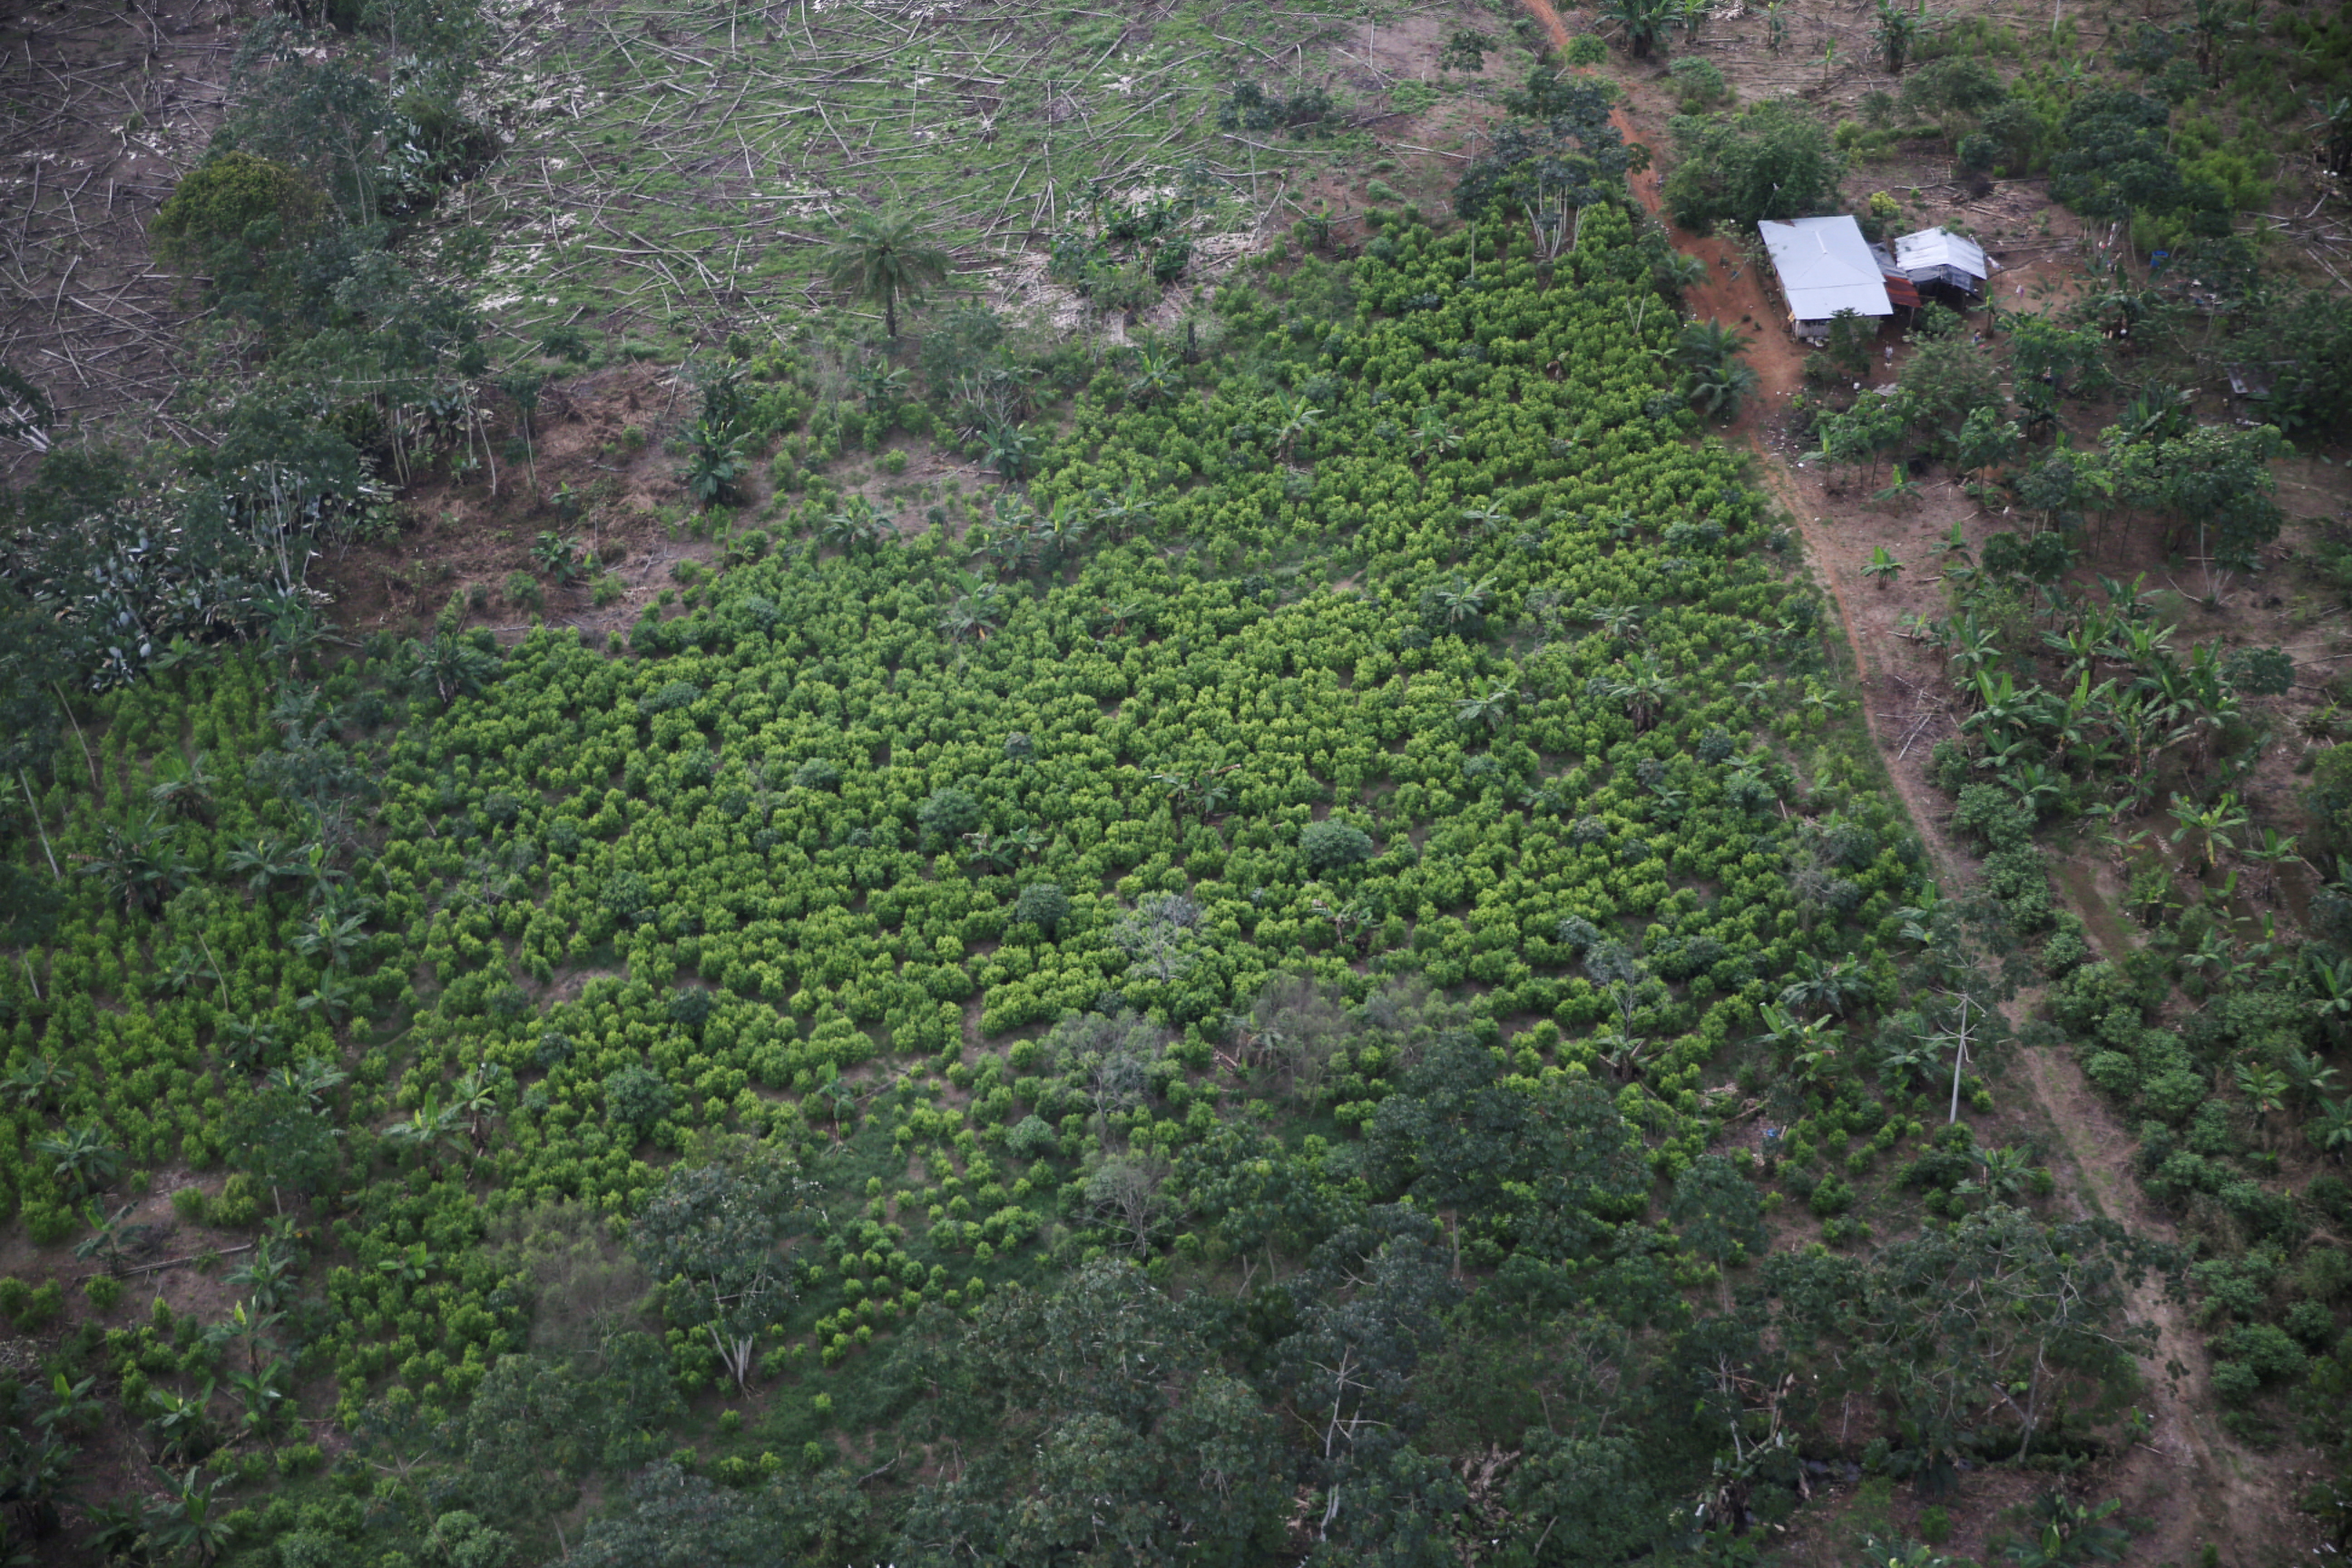 An aerial view of coca plantations in Tumaco